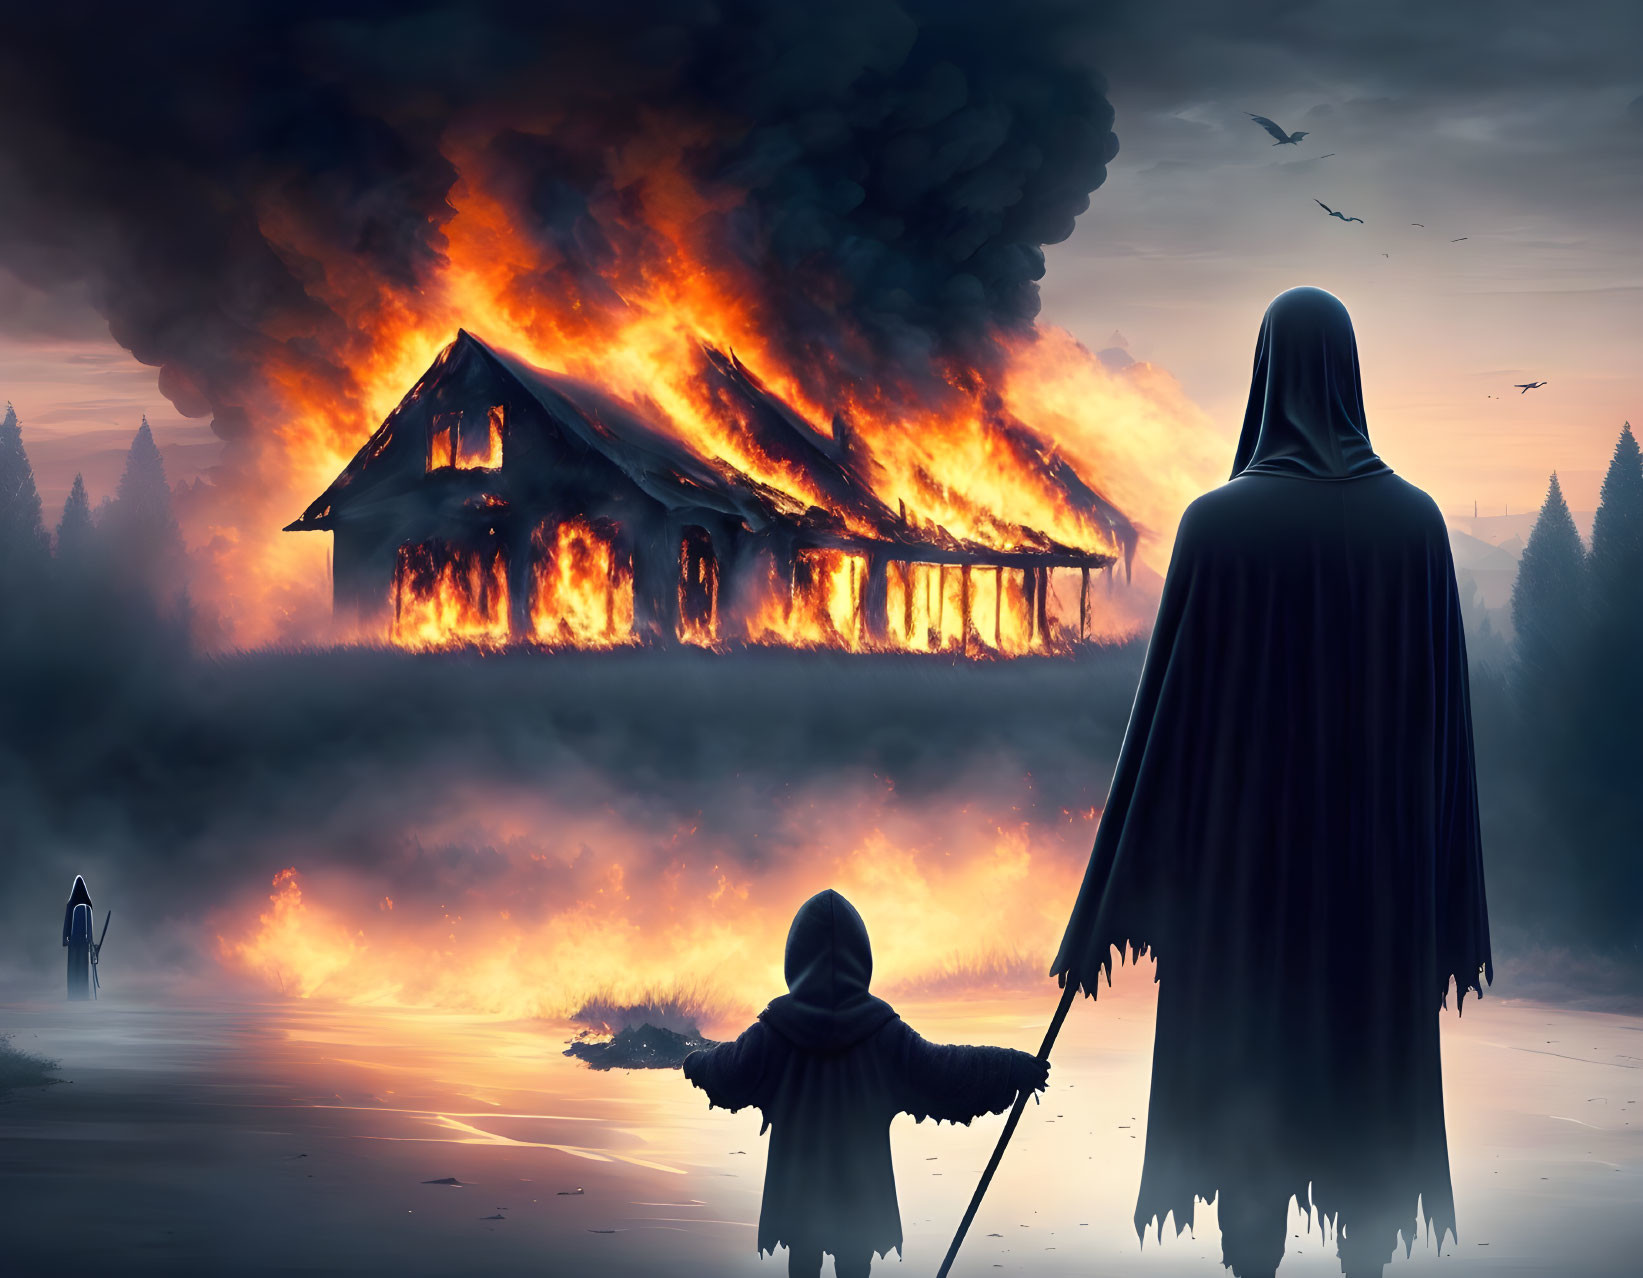 Cloaked figure observes burning house at dusk with smoke and silhouettes